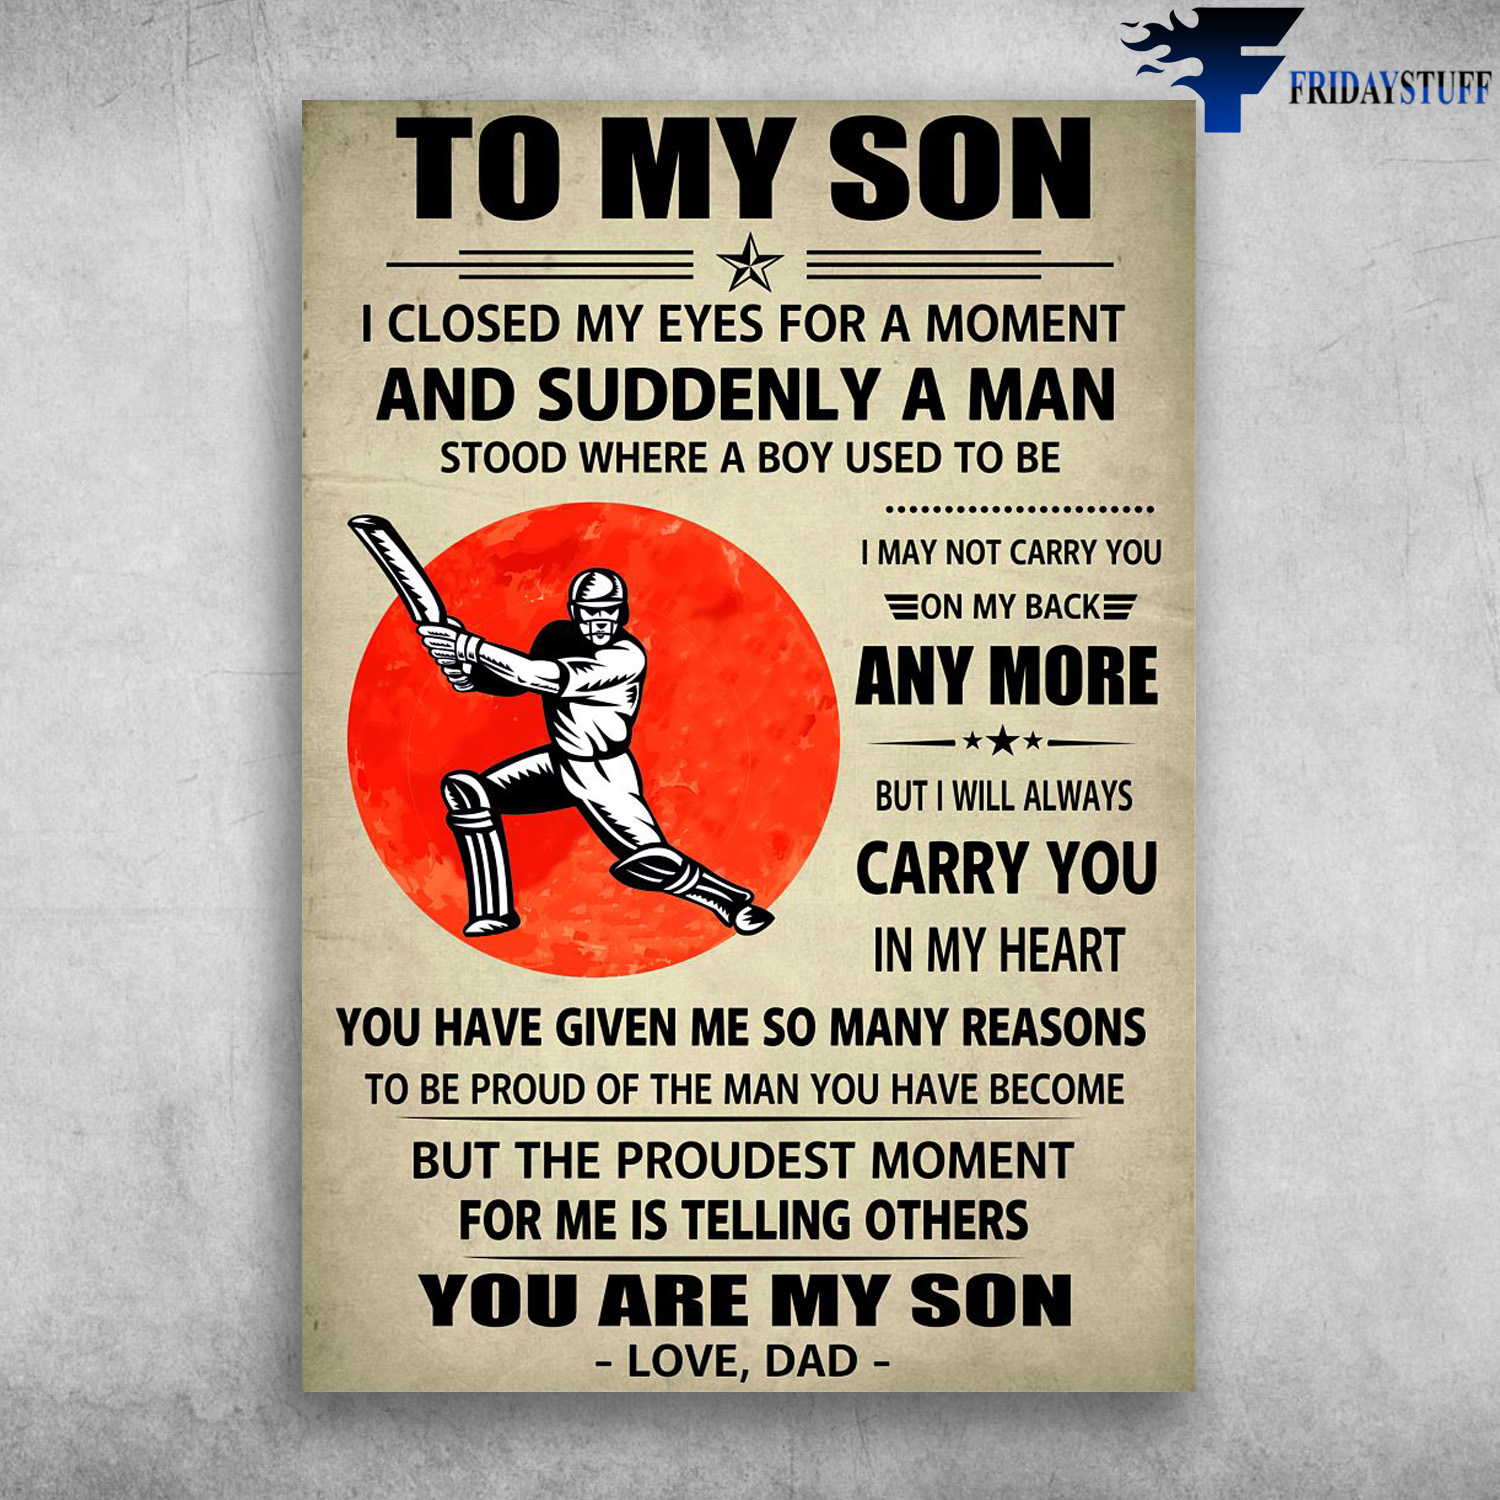 Baseball Player - To My Son, I Closed My Eyes For A Moment, And Suddenly A Man, Stood Where A Boy Used To Be, I May Not Carry You, On My Back Anymore